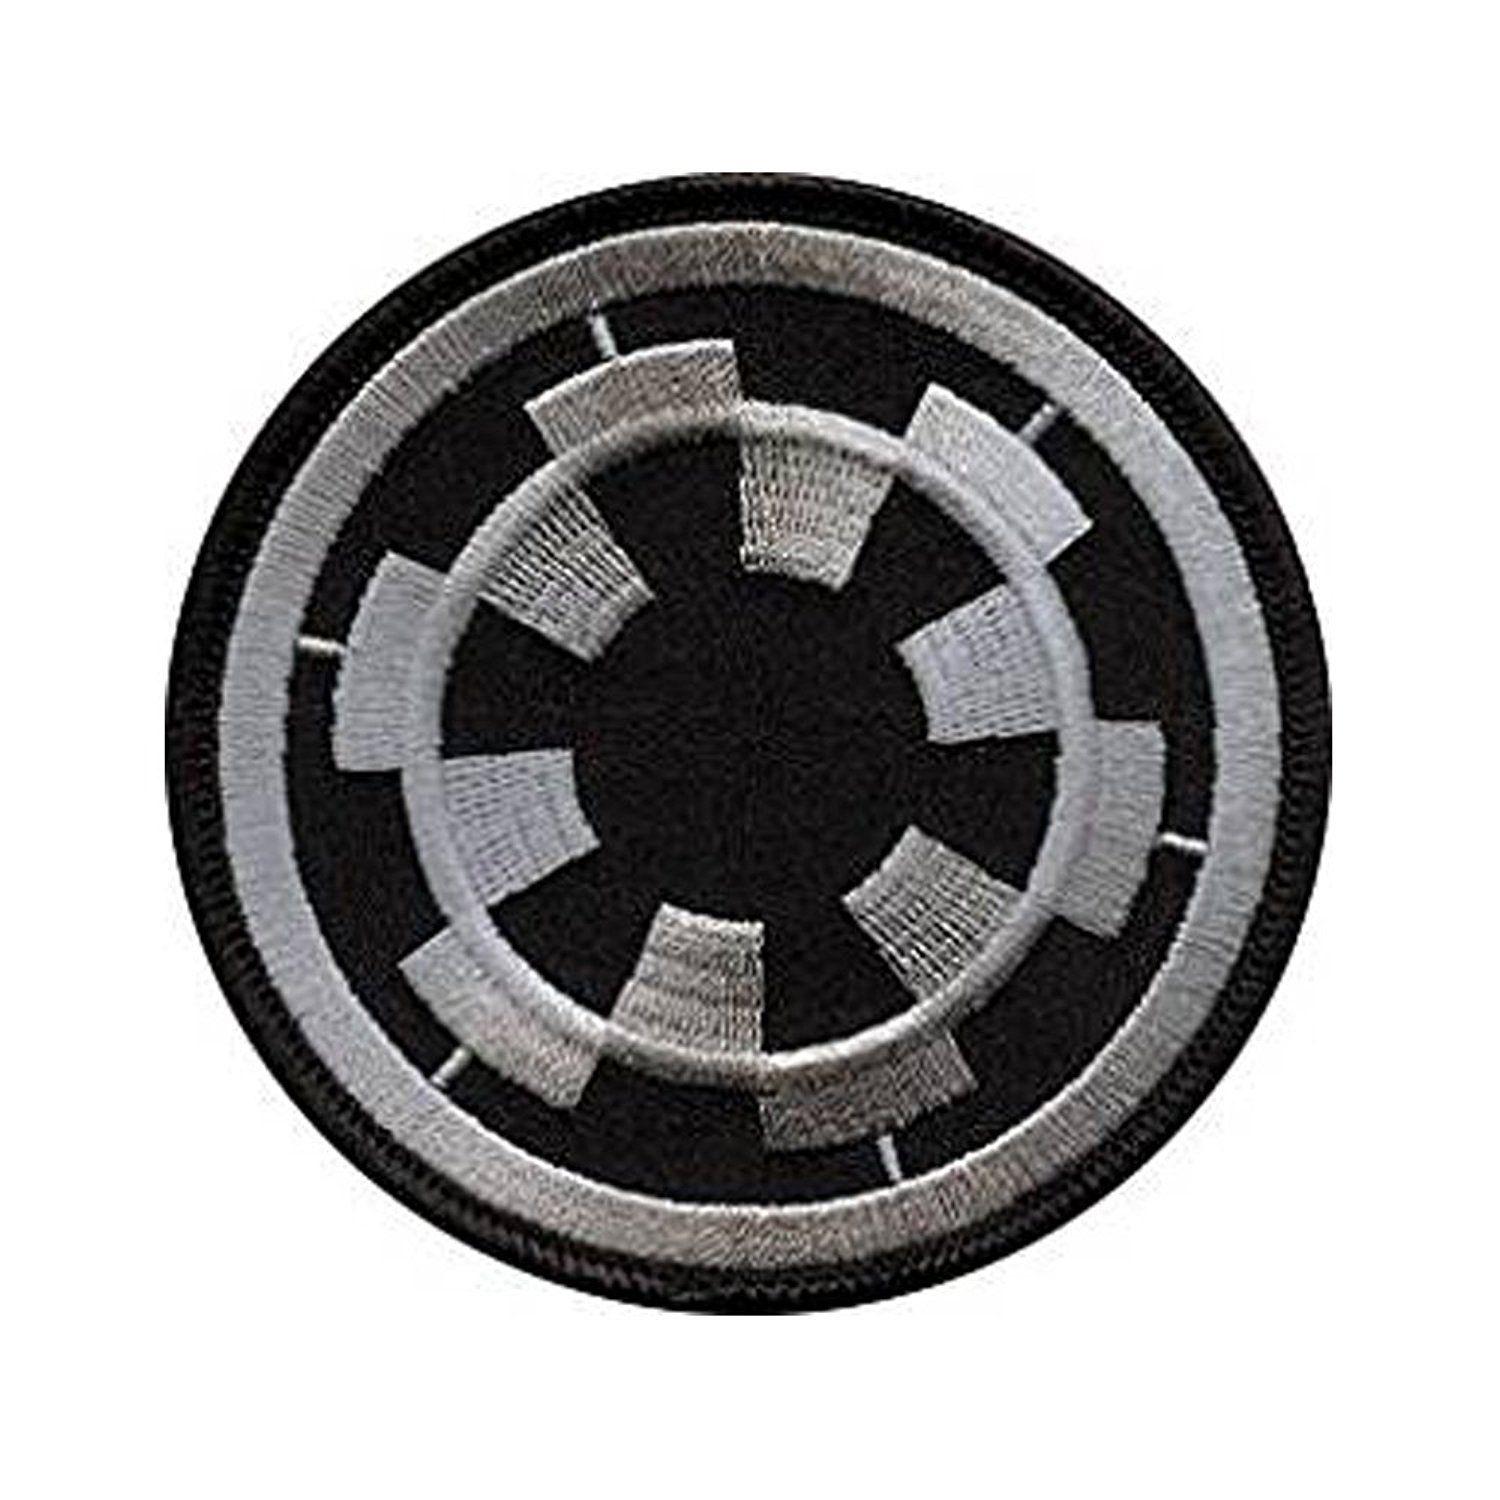 Imperail Logo - Star Wars: Imperial Target Patch